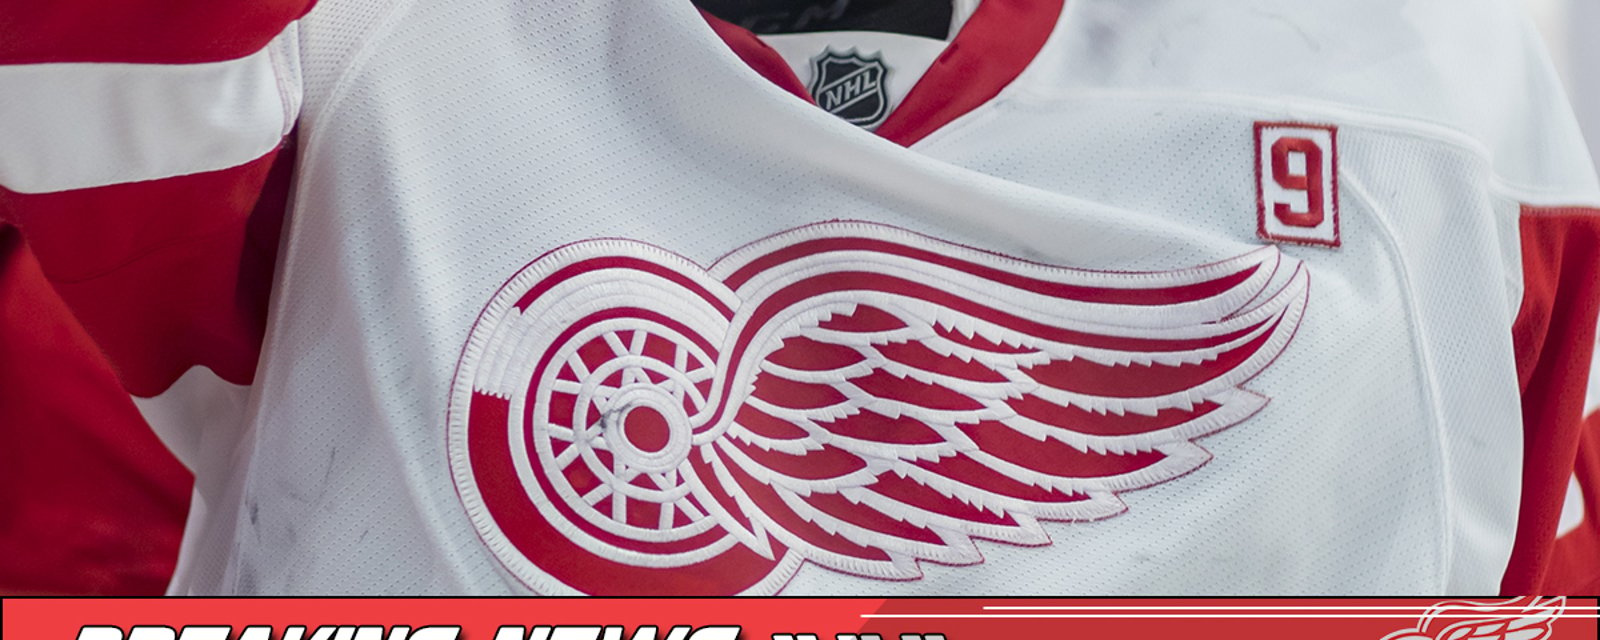 Breaking: A brand new player will wear the glorious Wings uniform tonight!